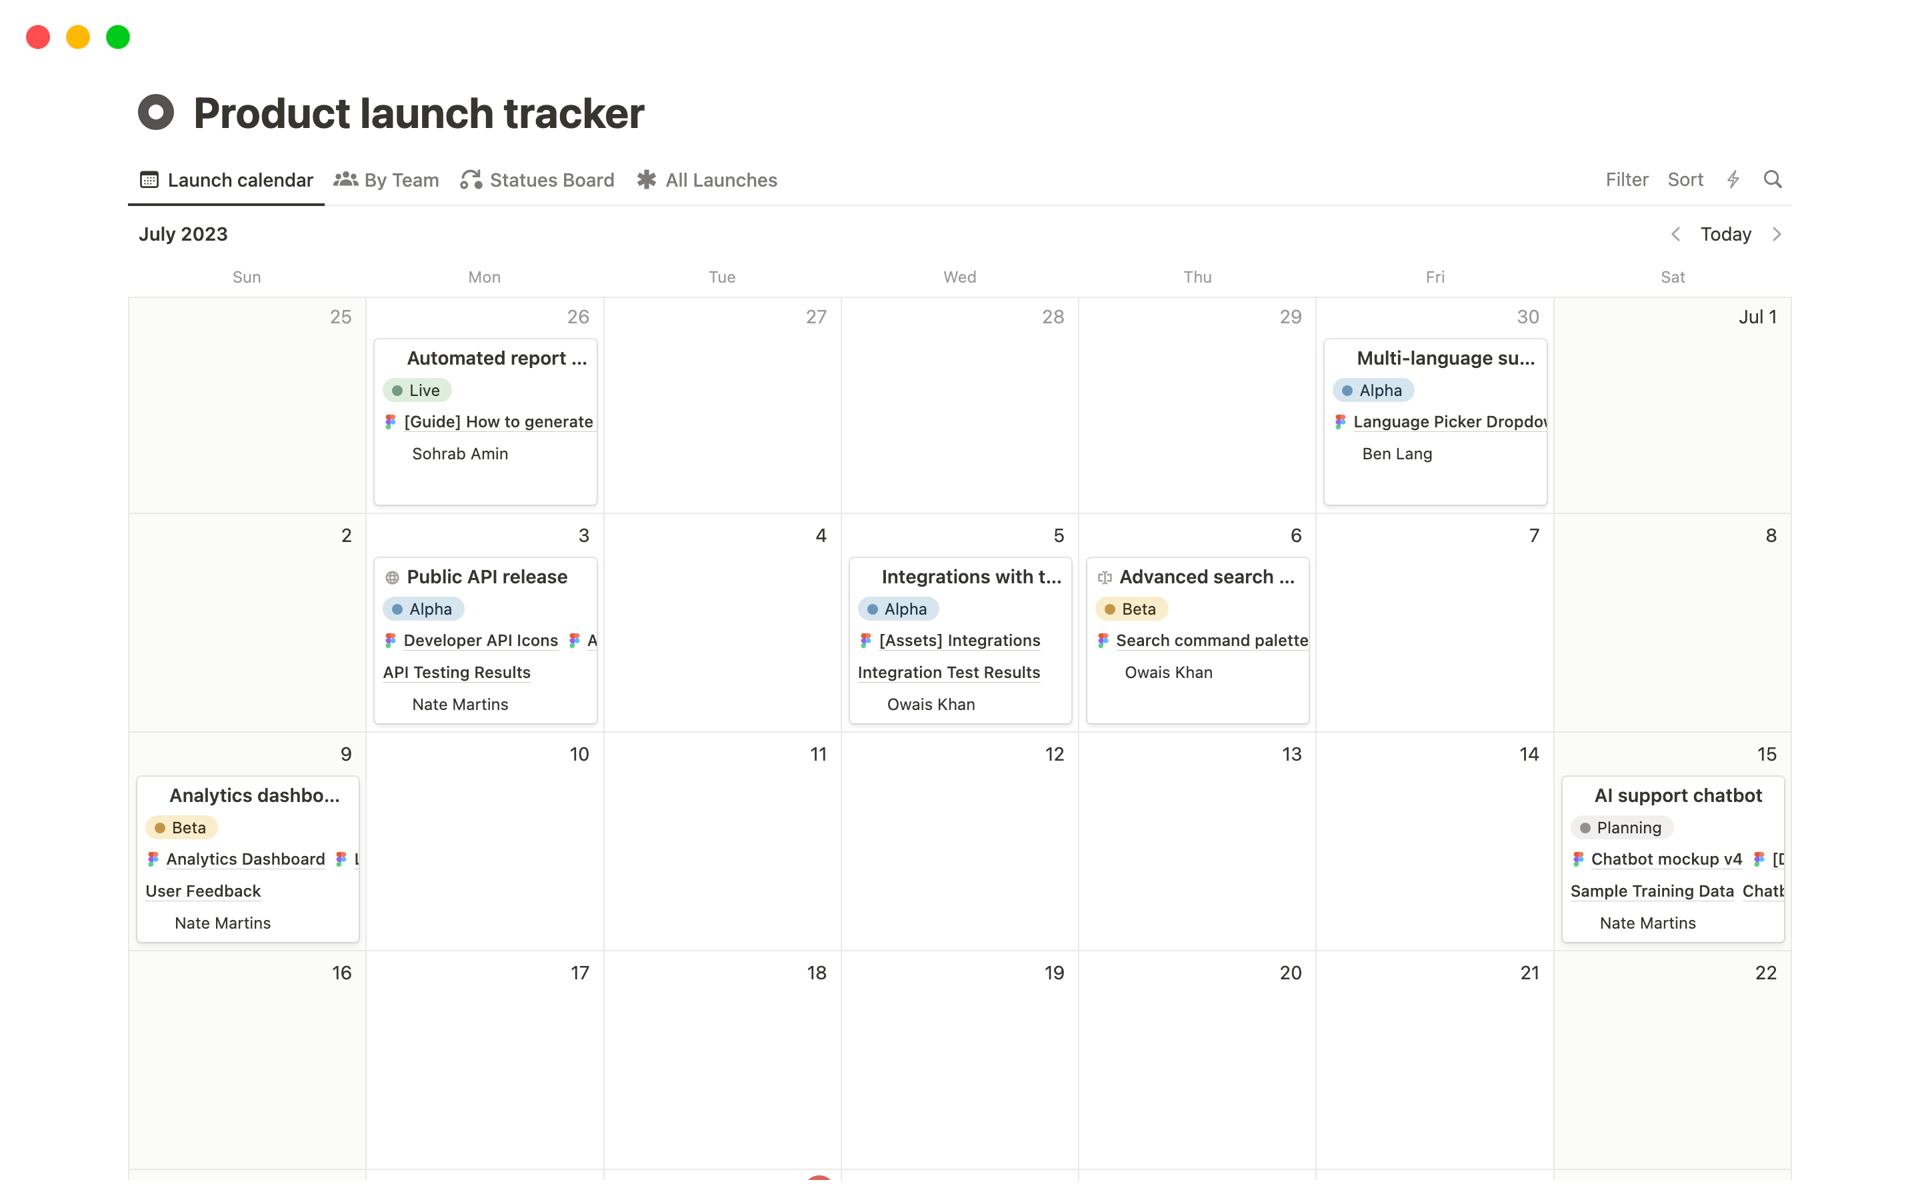 Prepare for your product launch by building context and tracking project tasks with our Product Launch Tracker template.